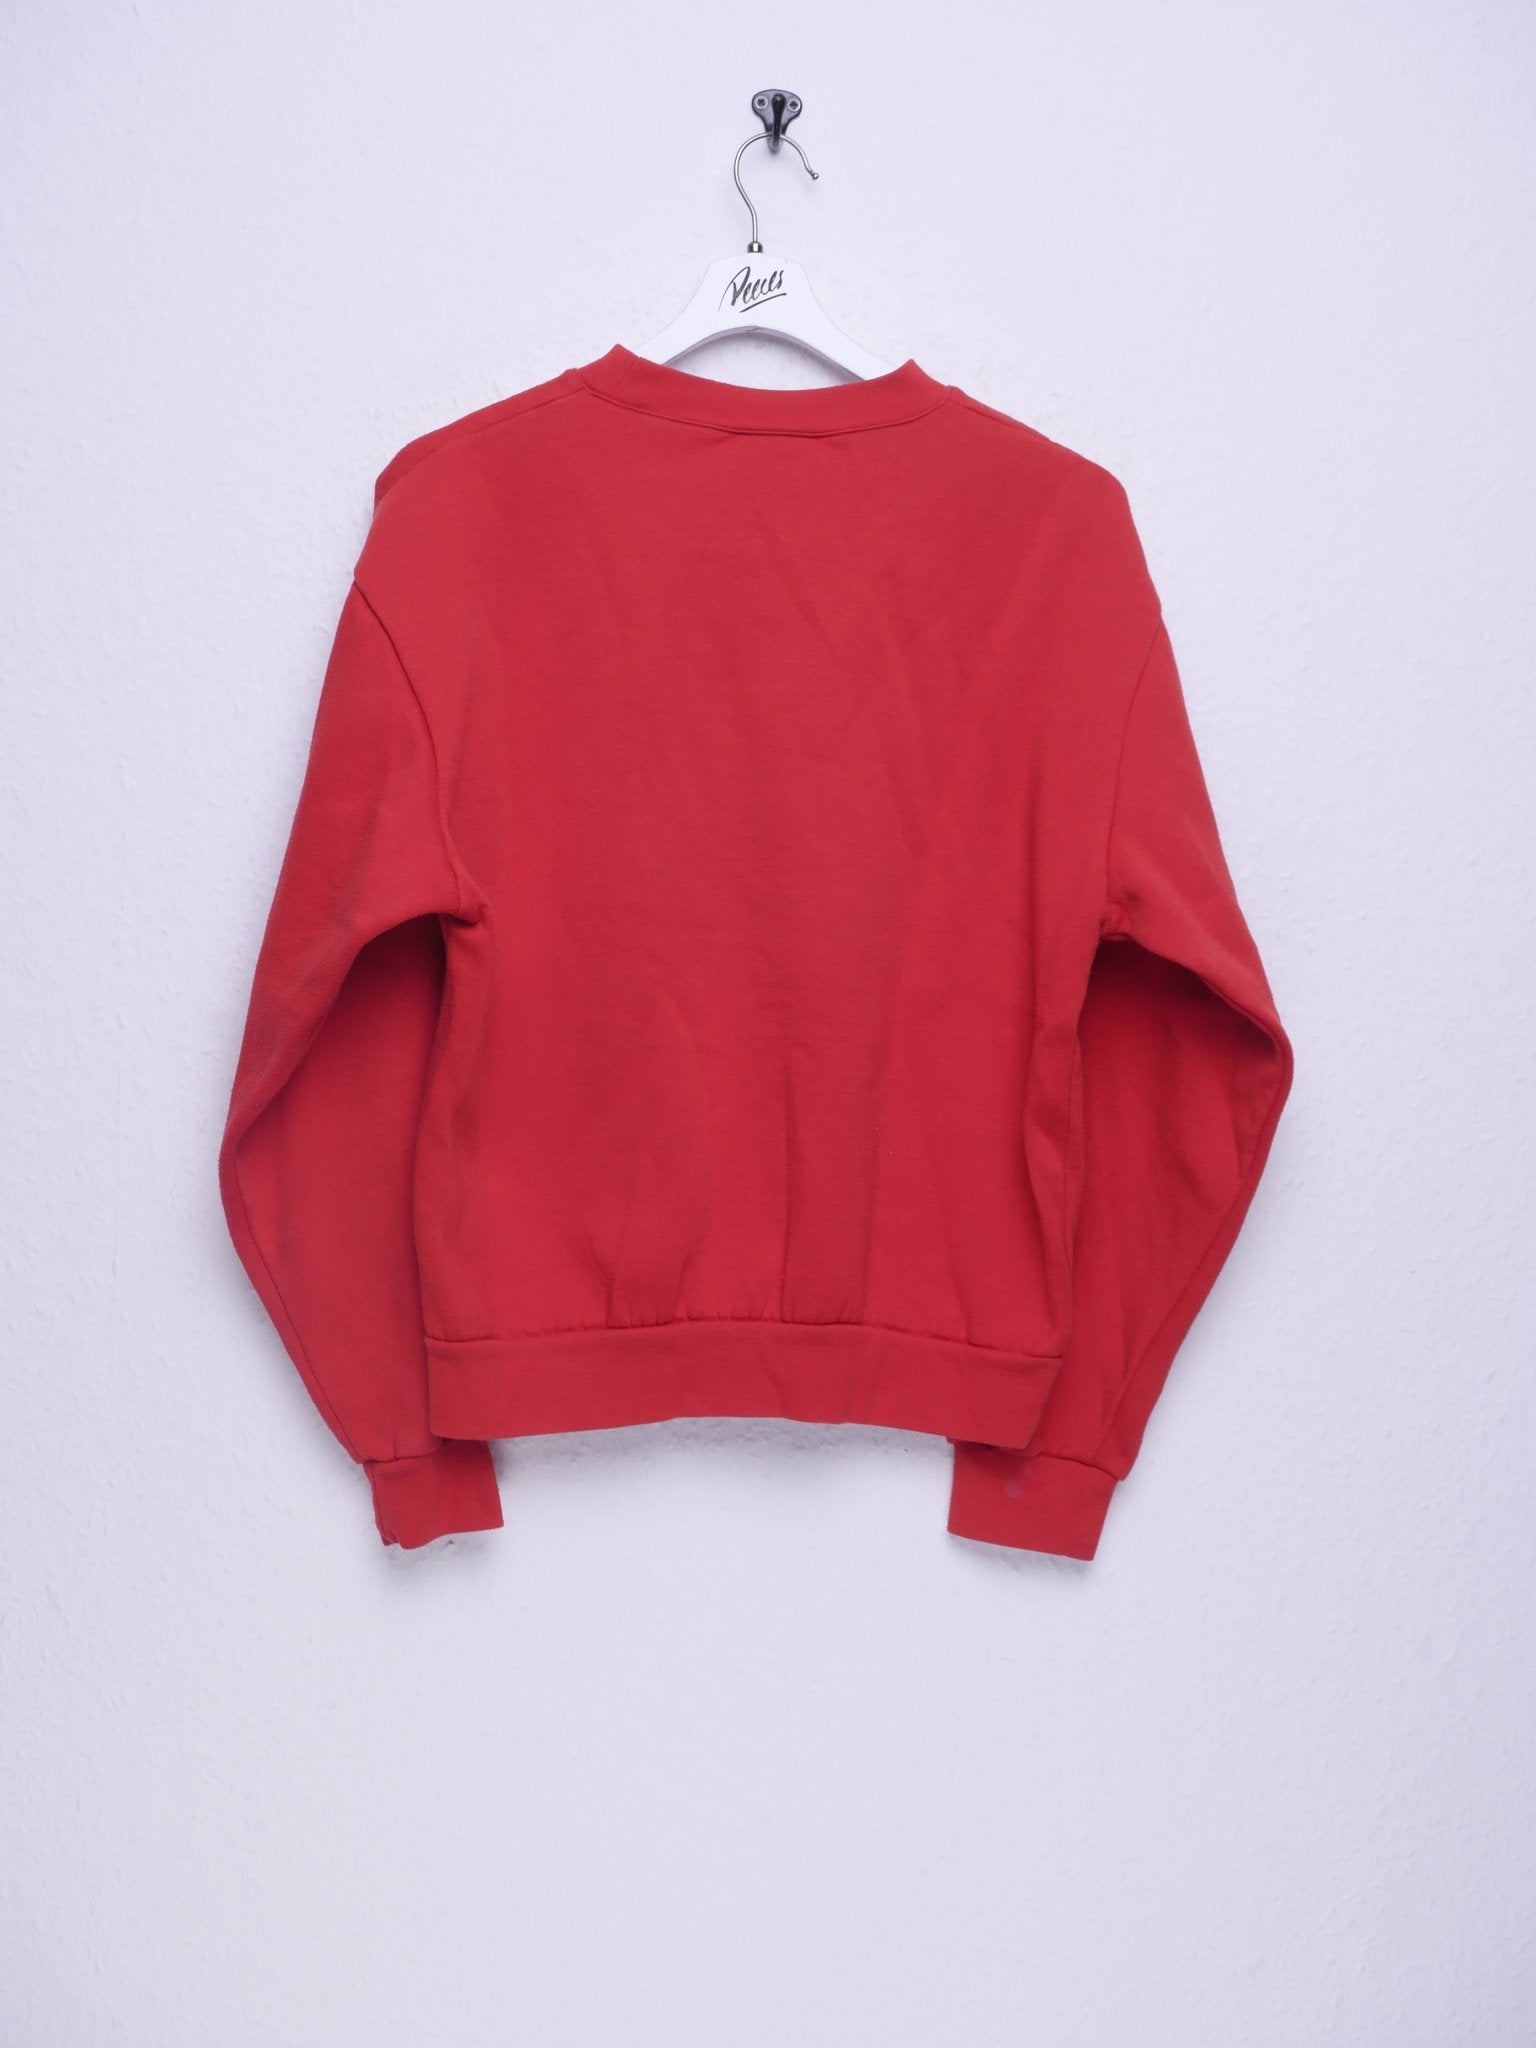 printed red Sweater - Peeces